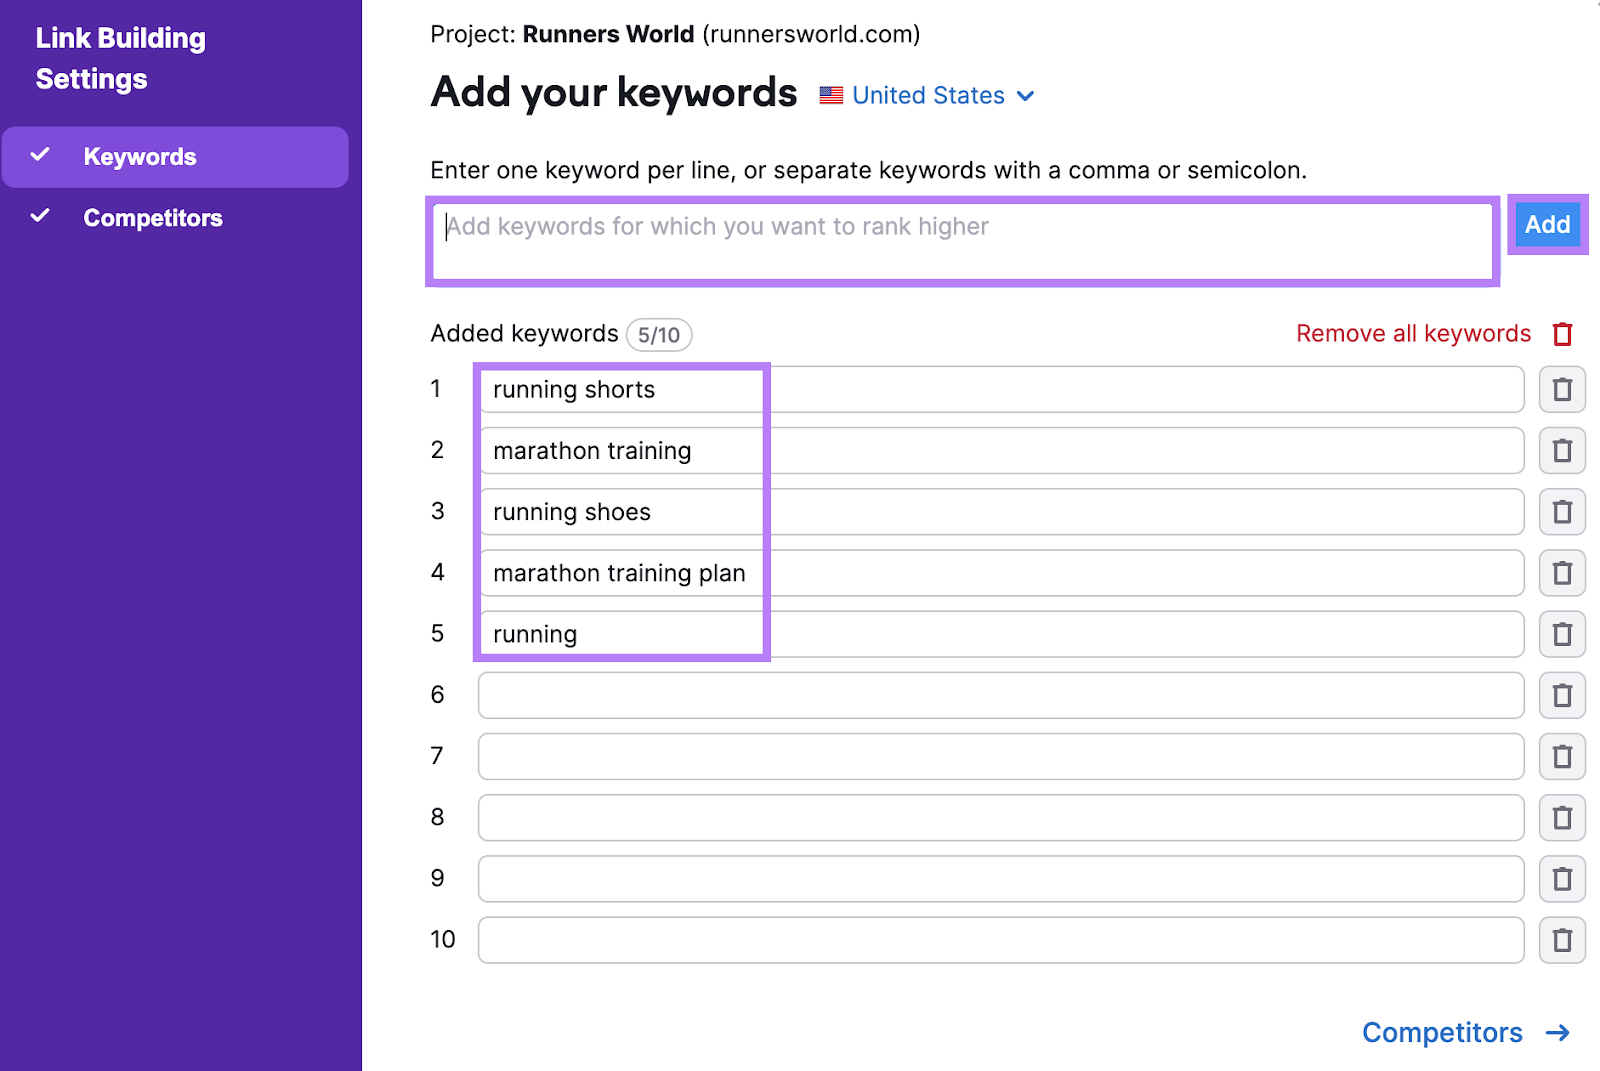 "Add your keywords" set-up window in Link Building tool